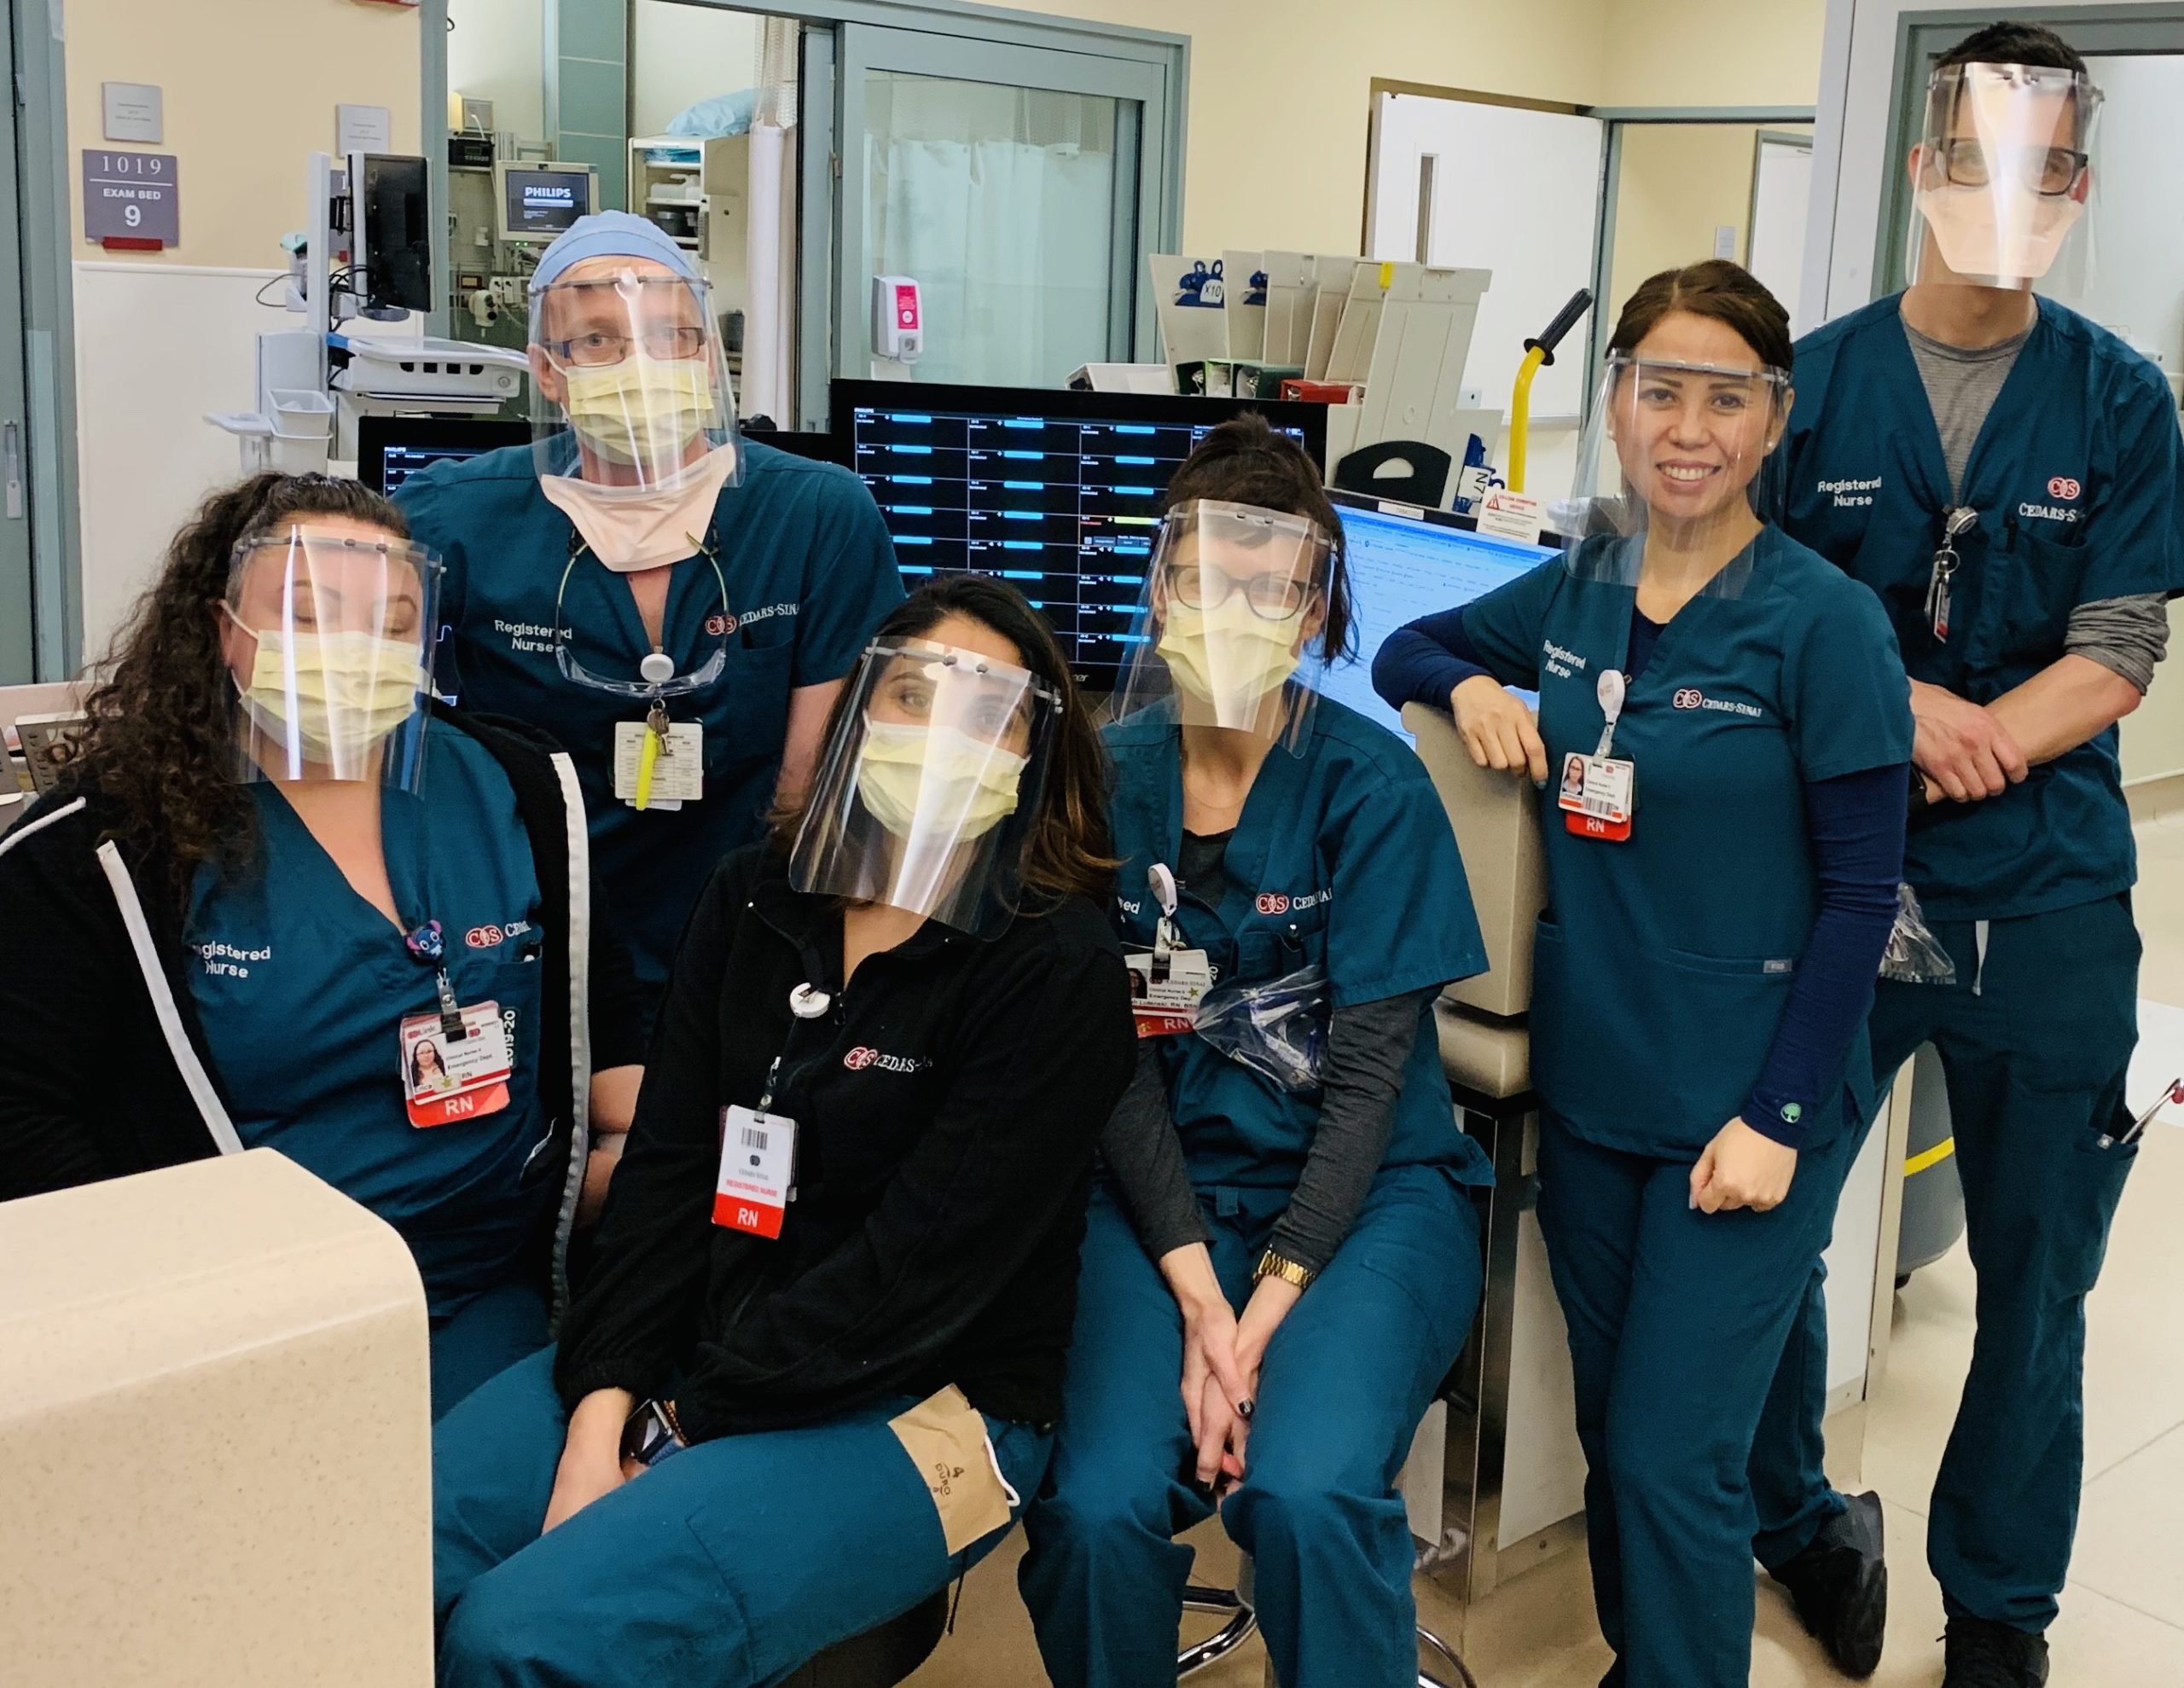 Camera Operator Andrew Brinkhaus and a team of Local 600 members have created 3D Agents of Shield, printing face masks for the medical community in desperate need of PPE.